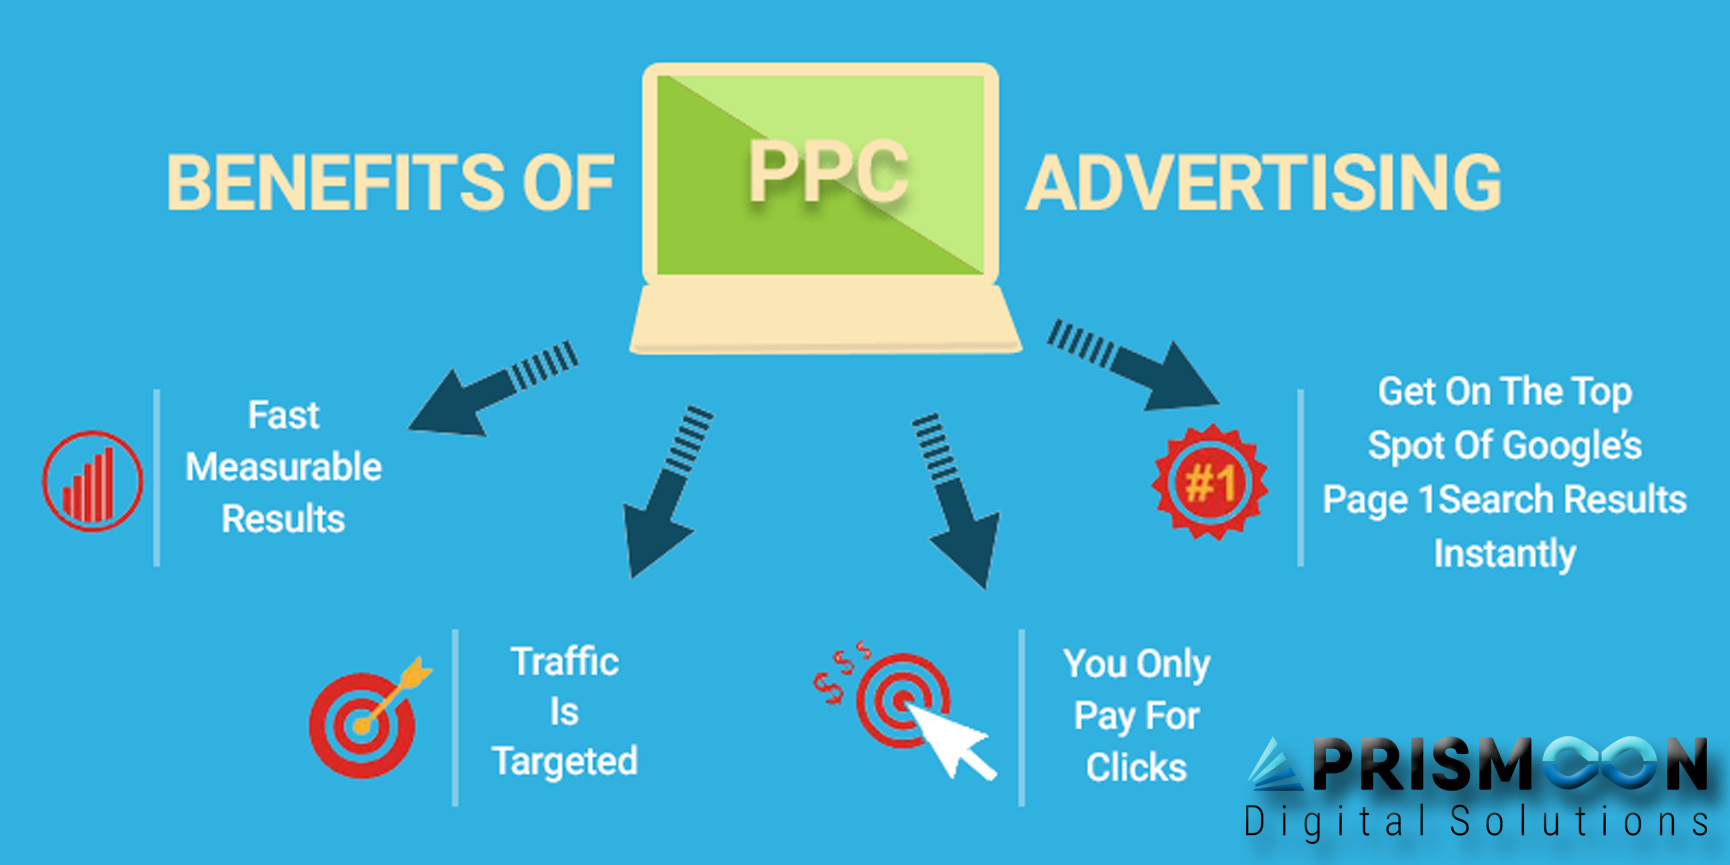 Advertising marketing is. PPC маркетинг. PPC реклама. Pay per click. PPC ads (pay per click)..